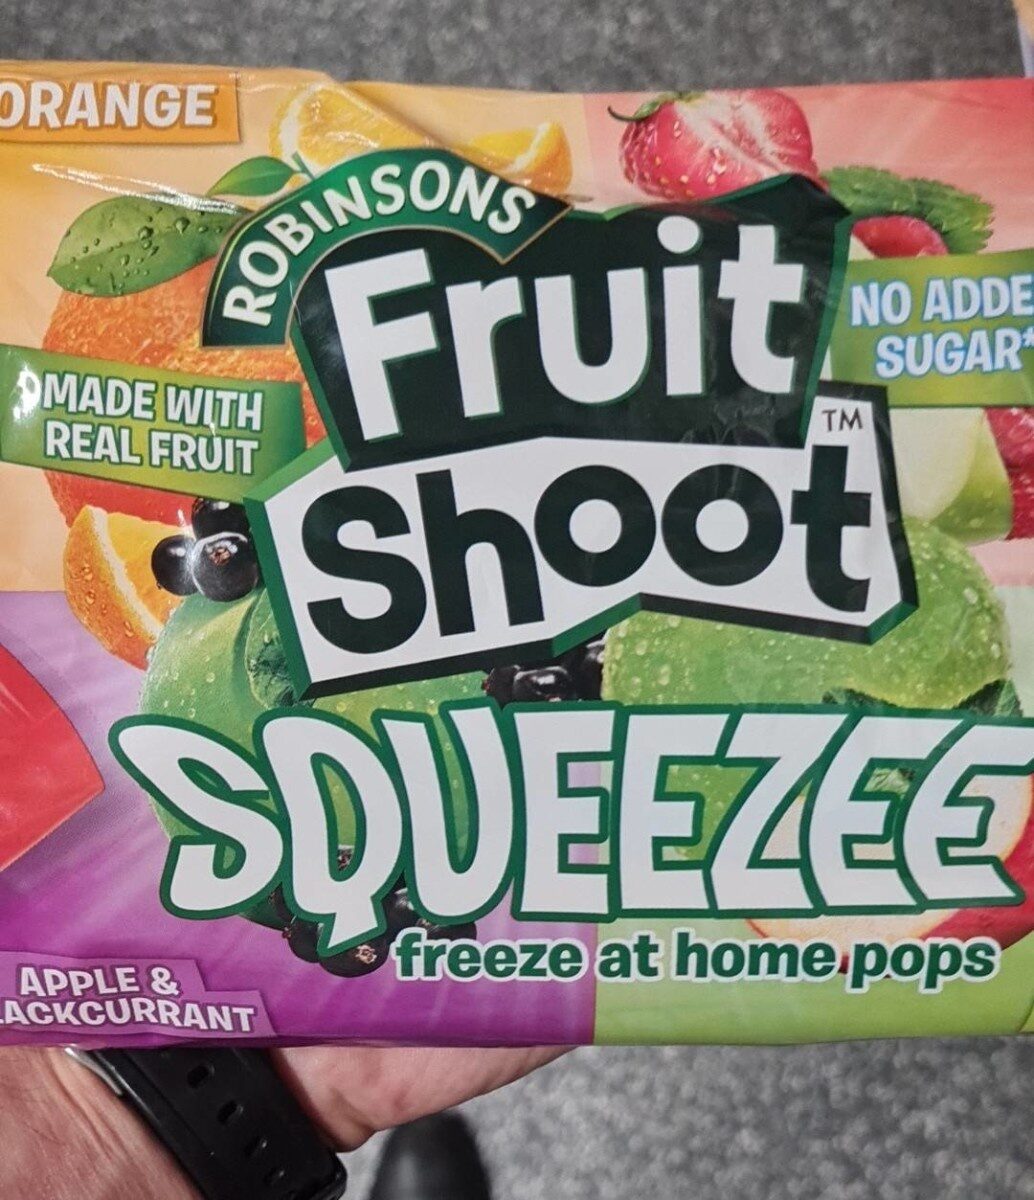 Fruit shoot squeezee - Product